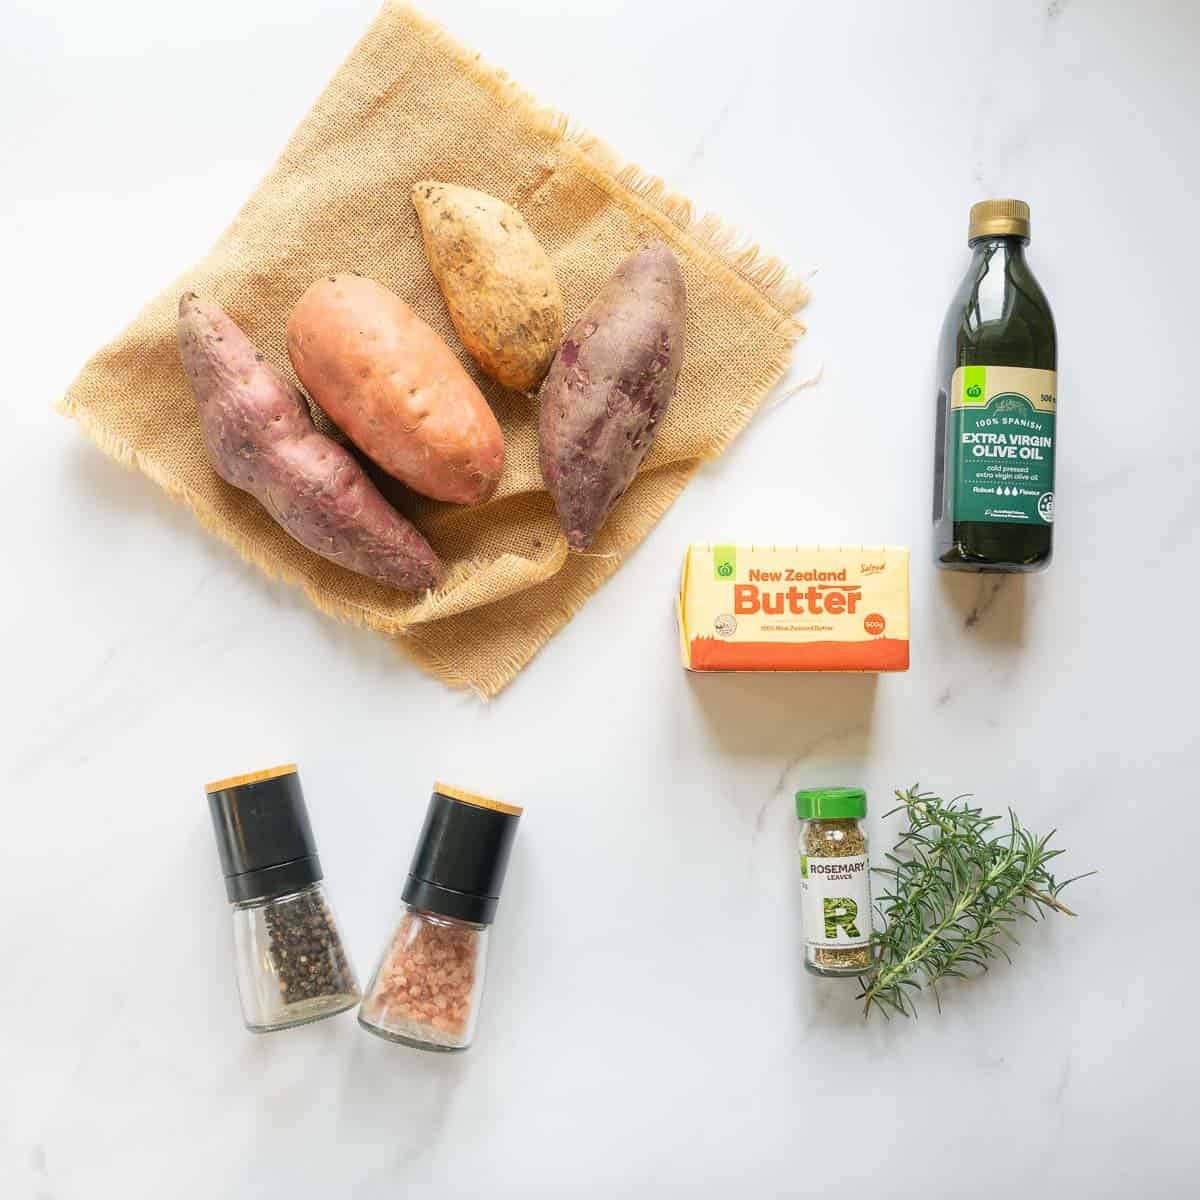 The ingredients to make a kumara bake laid out on a bench top.